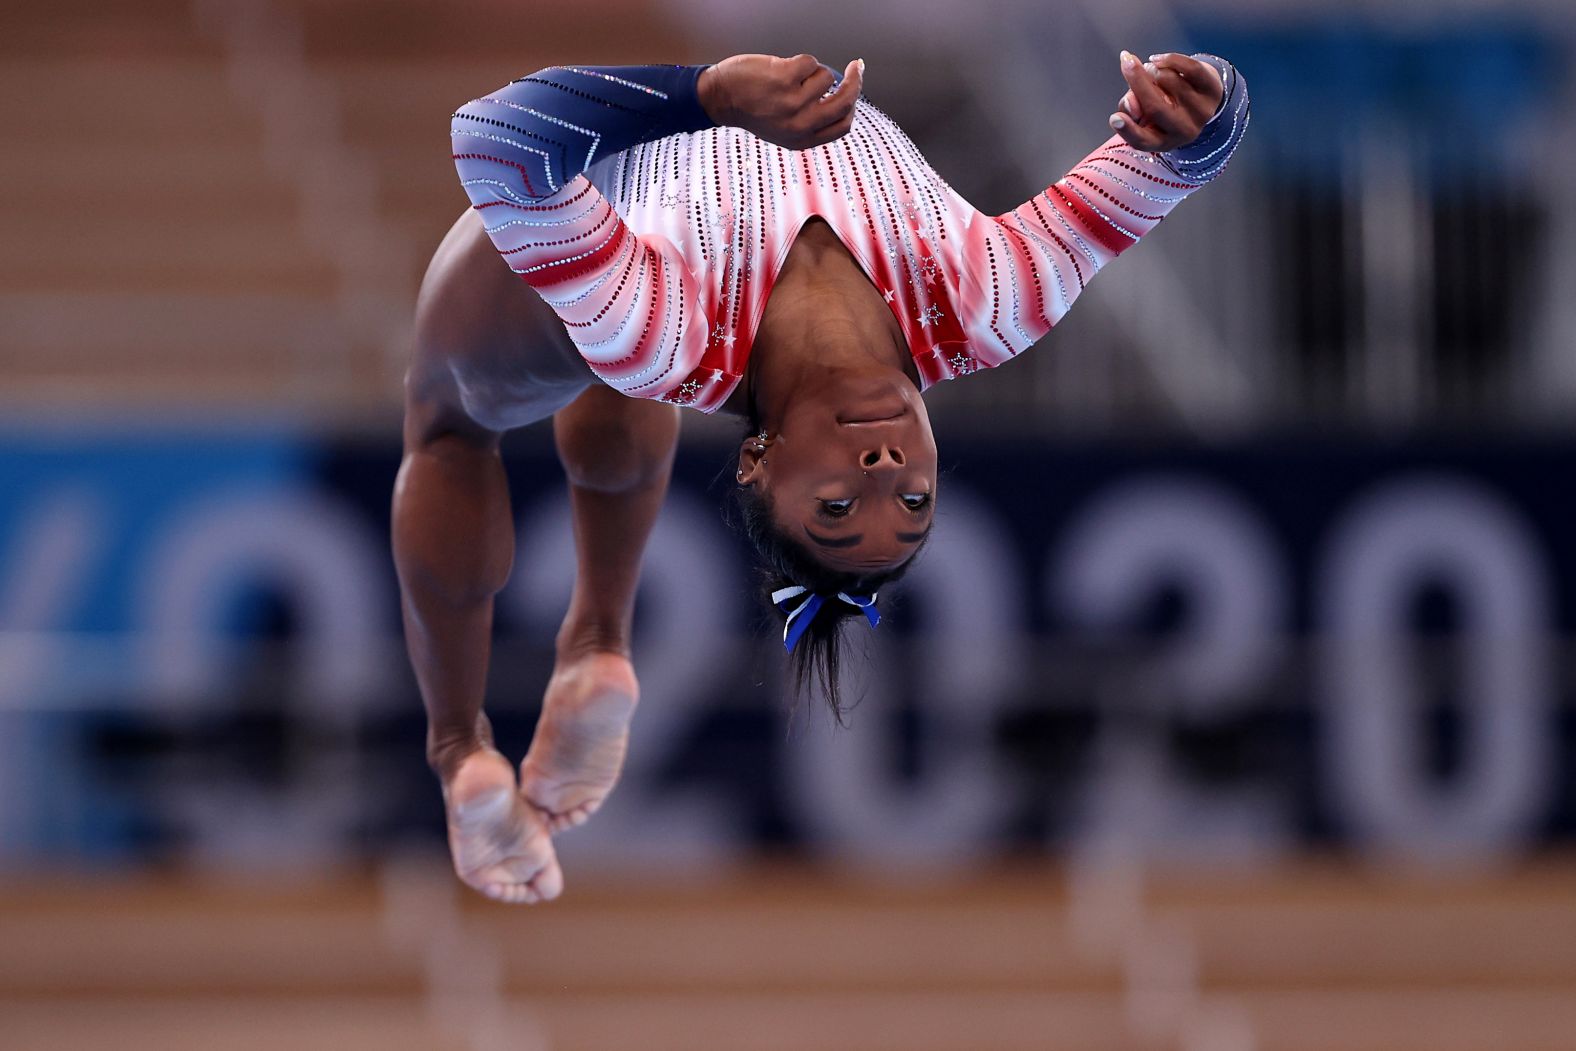 US gymnast Simone Biles competes in the balance beam final on Tuesday, August 3. <a href="index.php?page=&url=http%3A%2F%2Fwww.cnn.com%2F2021%2F08%2F03%2Fsport%2Fgallery%2Fsimone-biles-return-balance-beam%2Findex.html" target="_blank">She won the bronze</a> in her much-anticipated return to competition.